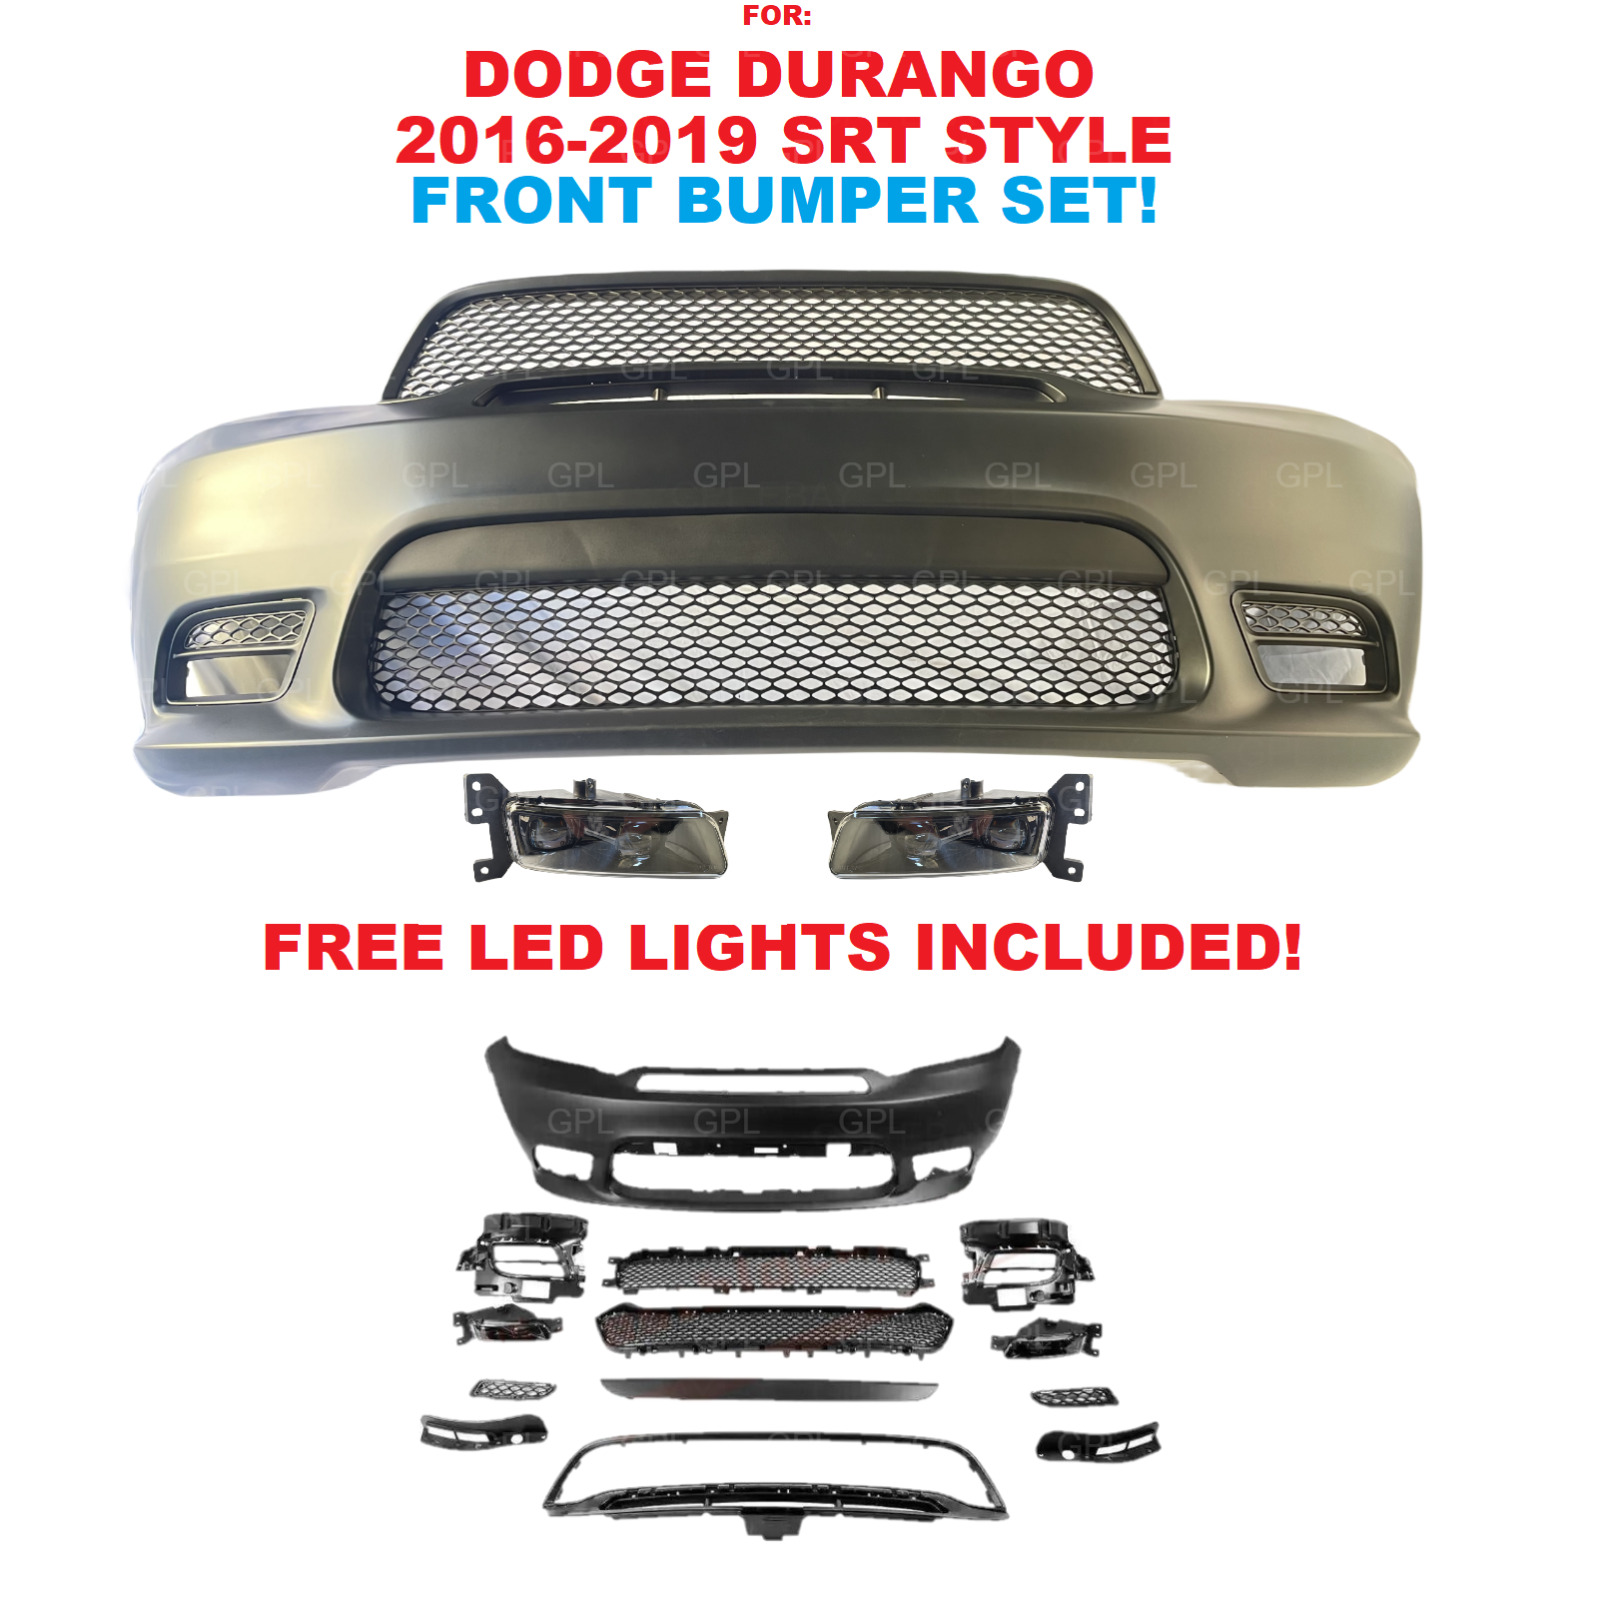 For Dodge Durango 2016-2019 SRT Style Front Bumper Cover Kit with LED Fog Lamps